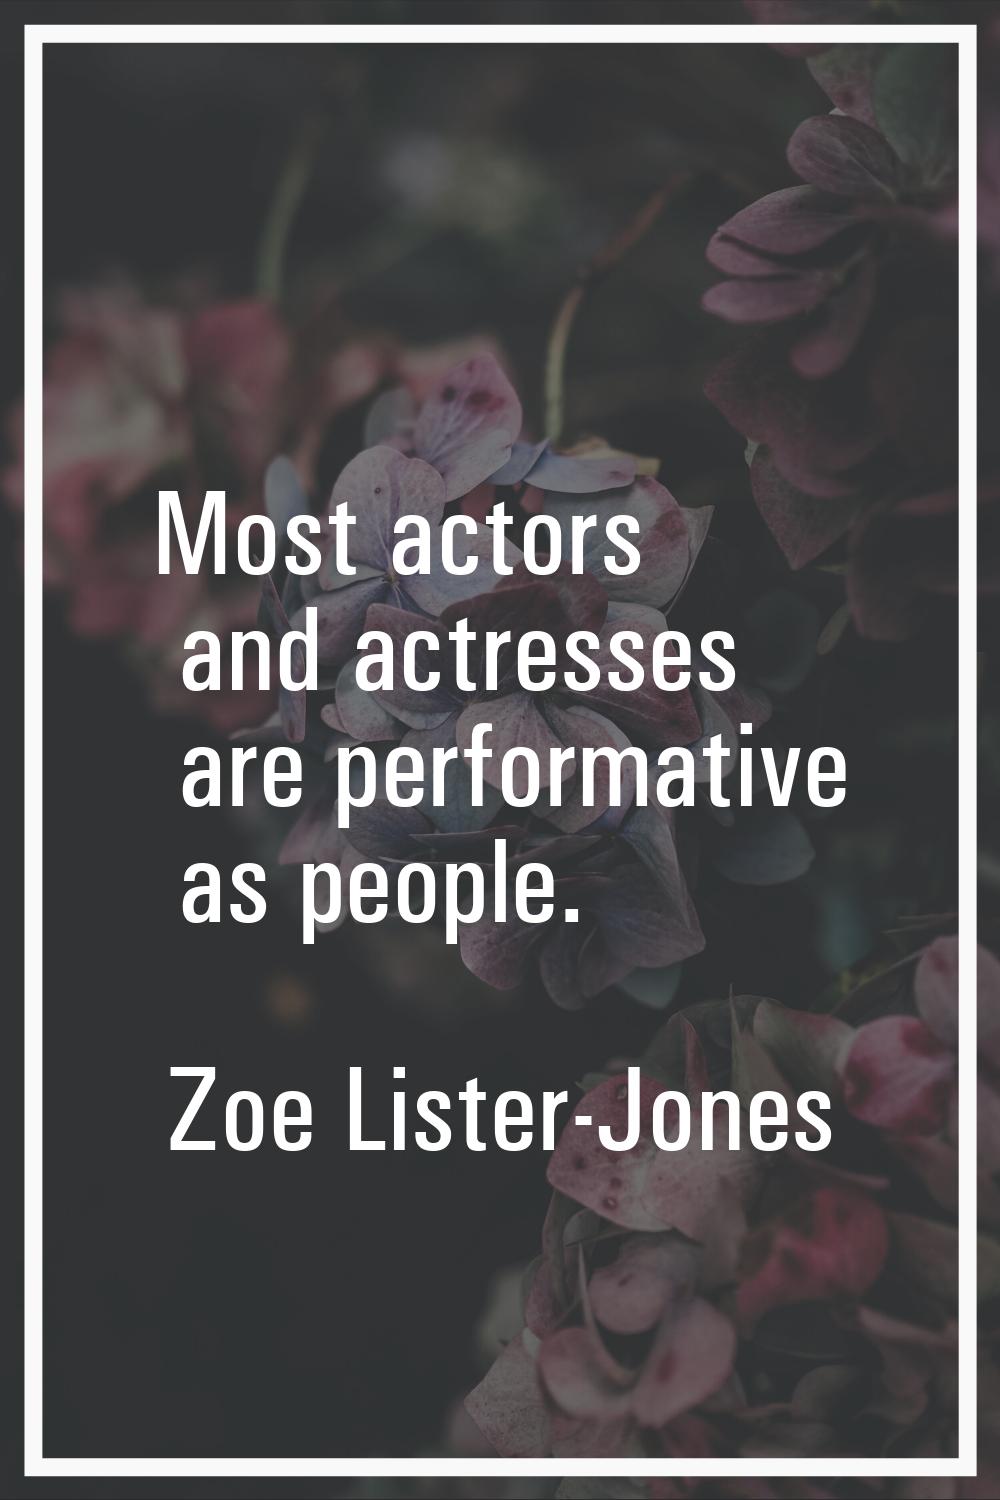 Most actors and actresses are performative as people.